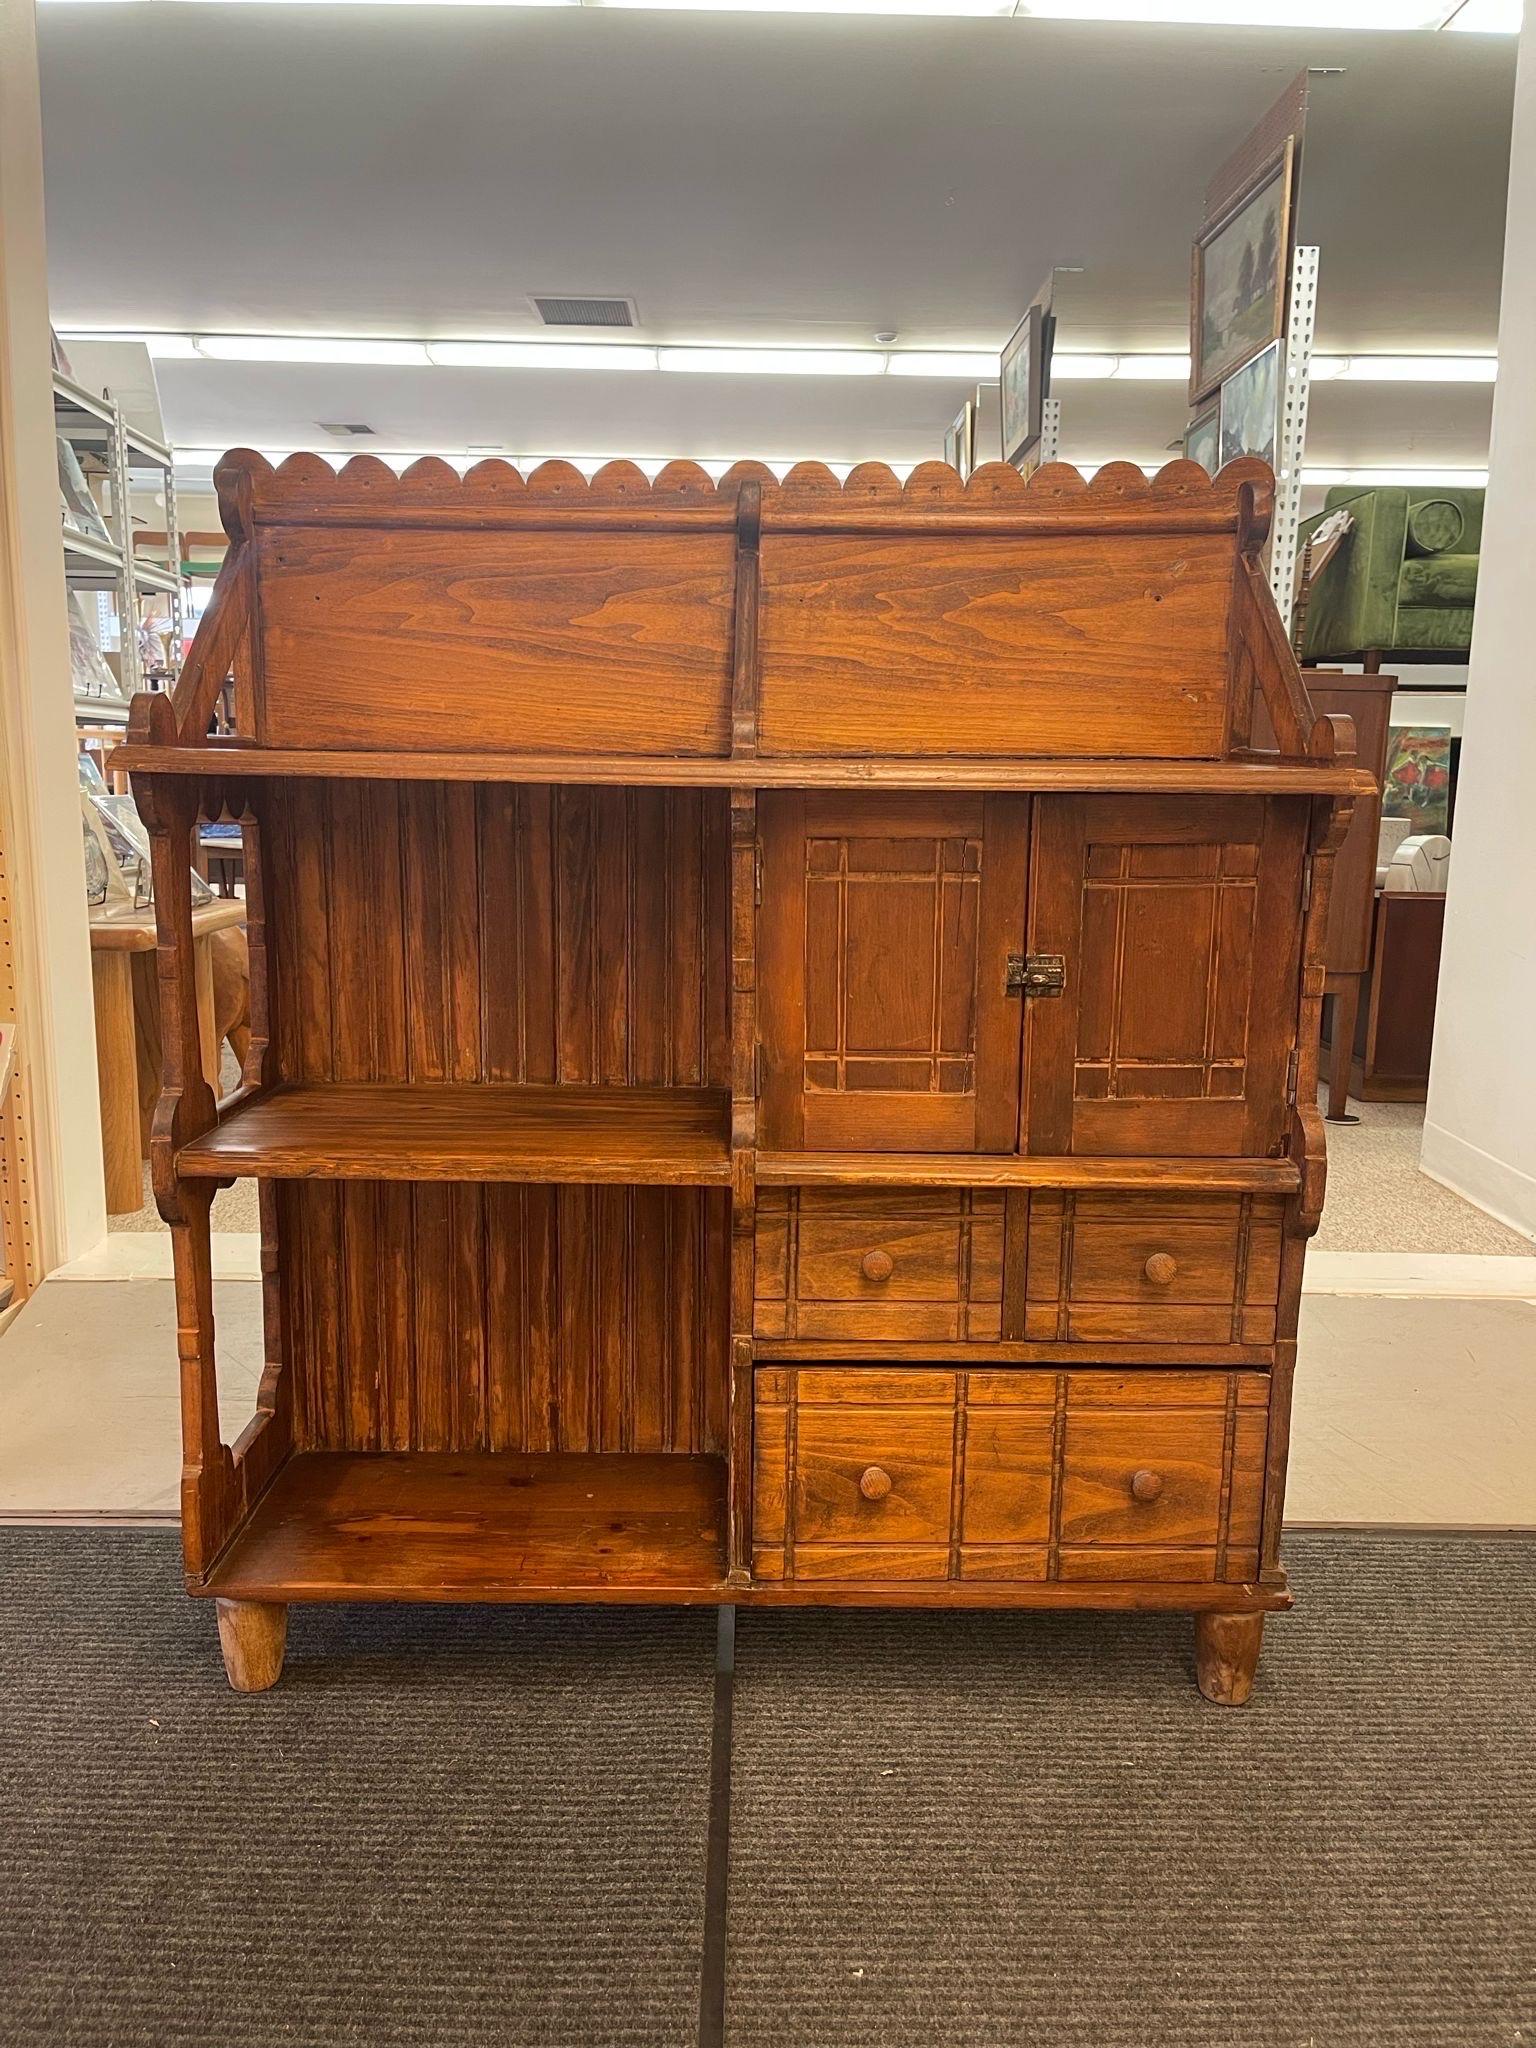 This bookshelf unit has handmade caved wood detailing everywhere. The top is scalloped detailing , that matches the detailing on the sides. The cabinet space has original hardware on the front. Three drawers with turned wood handles. Rustic design.